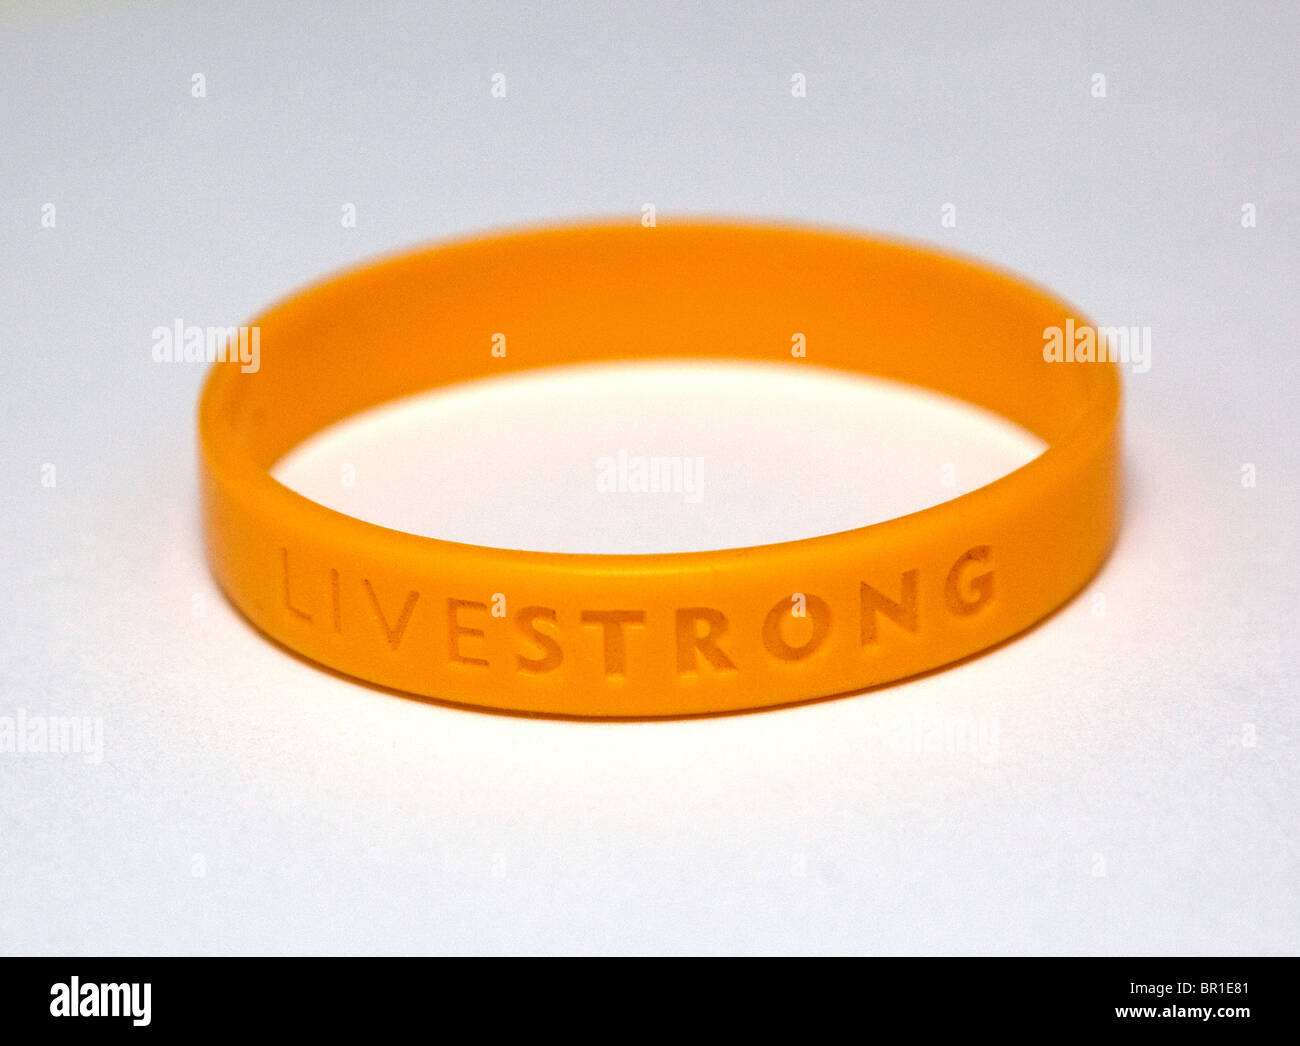 Lance Armstrong Foundation cancer armband Banque D'Images